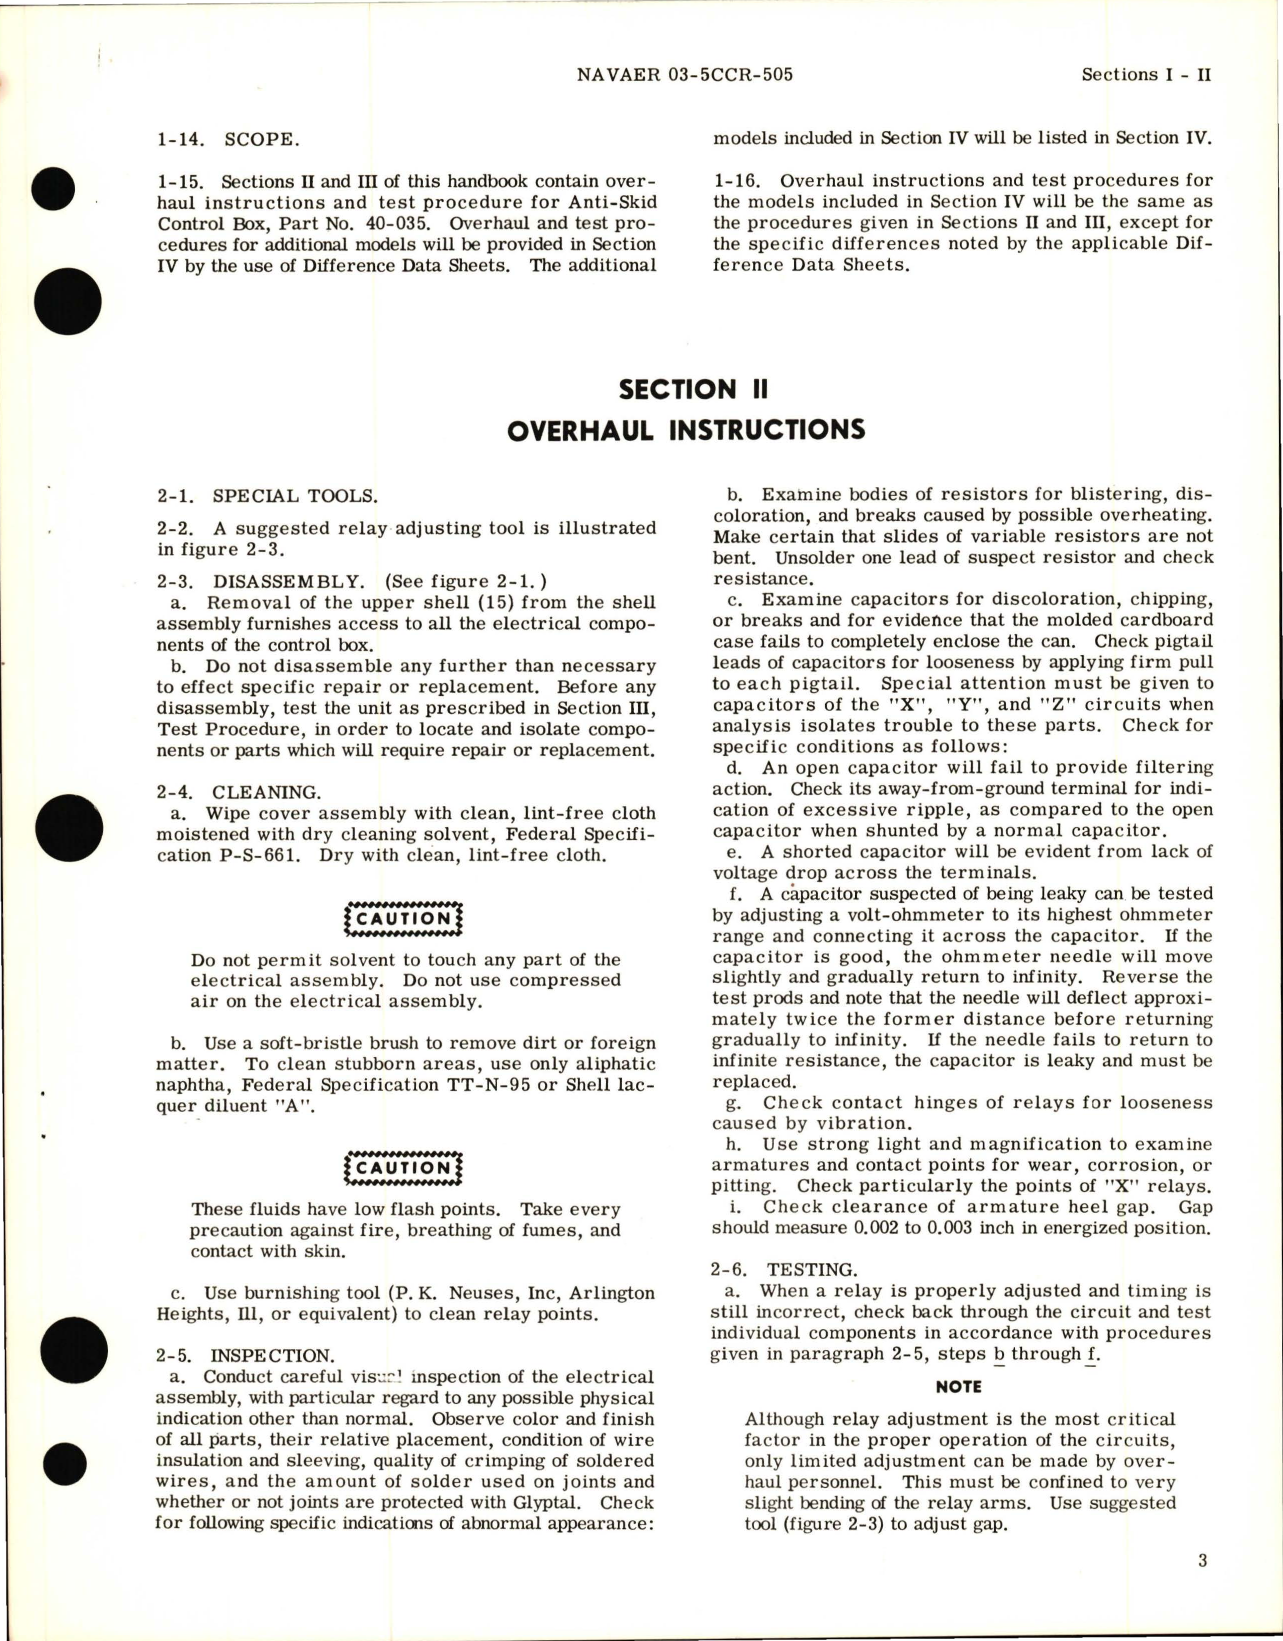 Sample page 5 from AirCorps Library document: Overhaul Instructions for Anti-Skid Control Box - Part 40-035